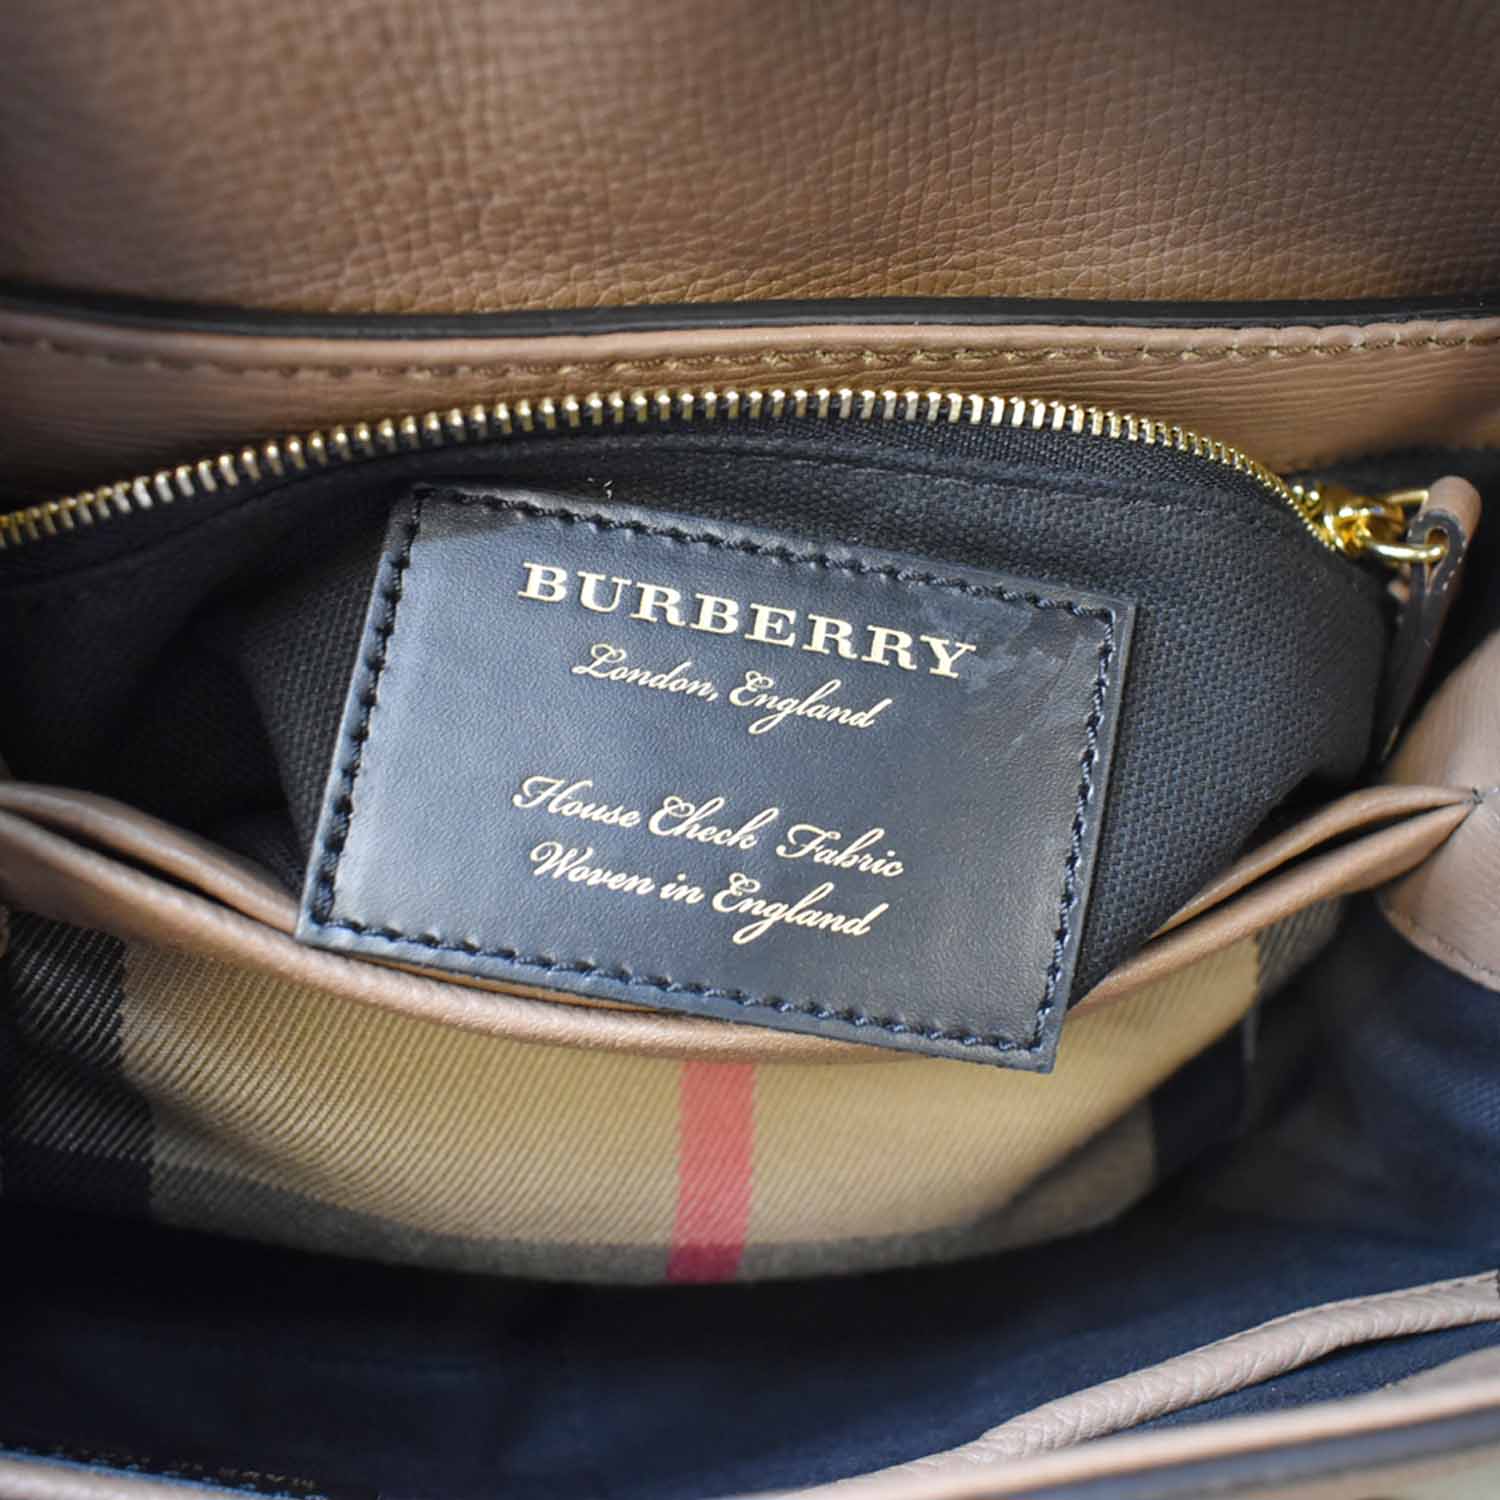 Burberry Burgundy/Beige Leather and House Check Fabric Mini Banner Tote